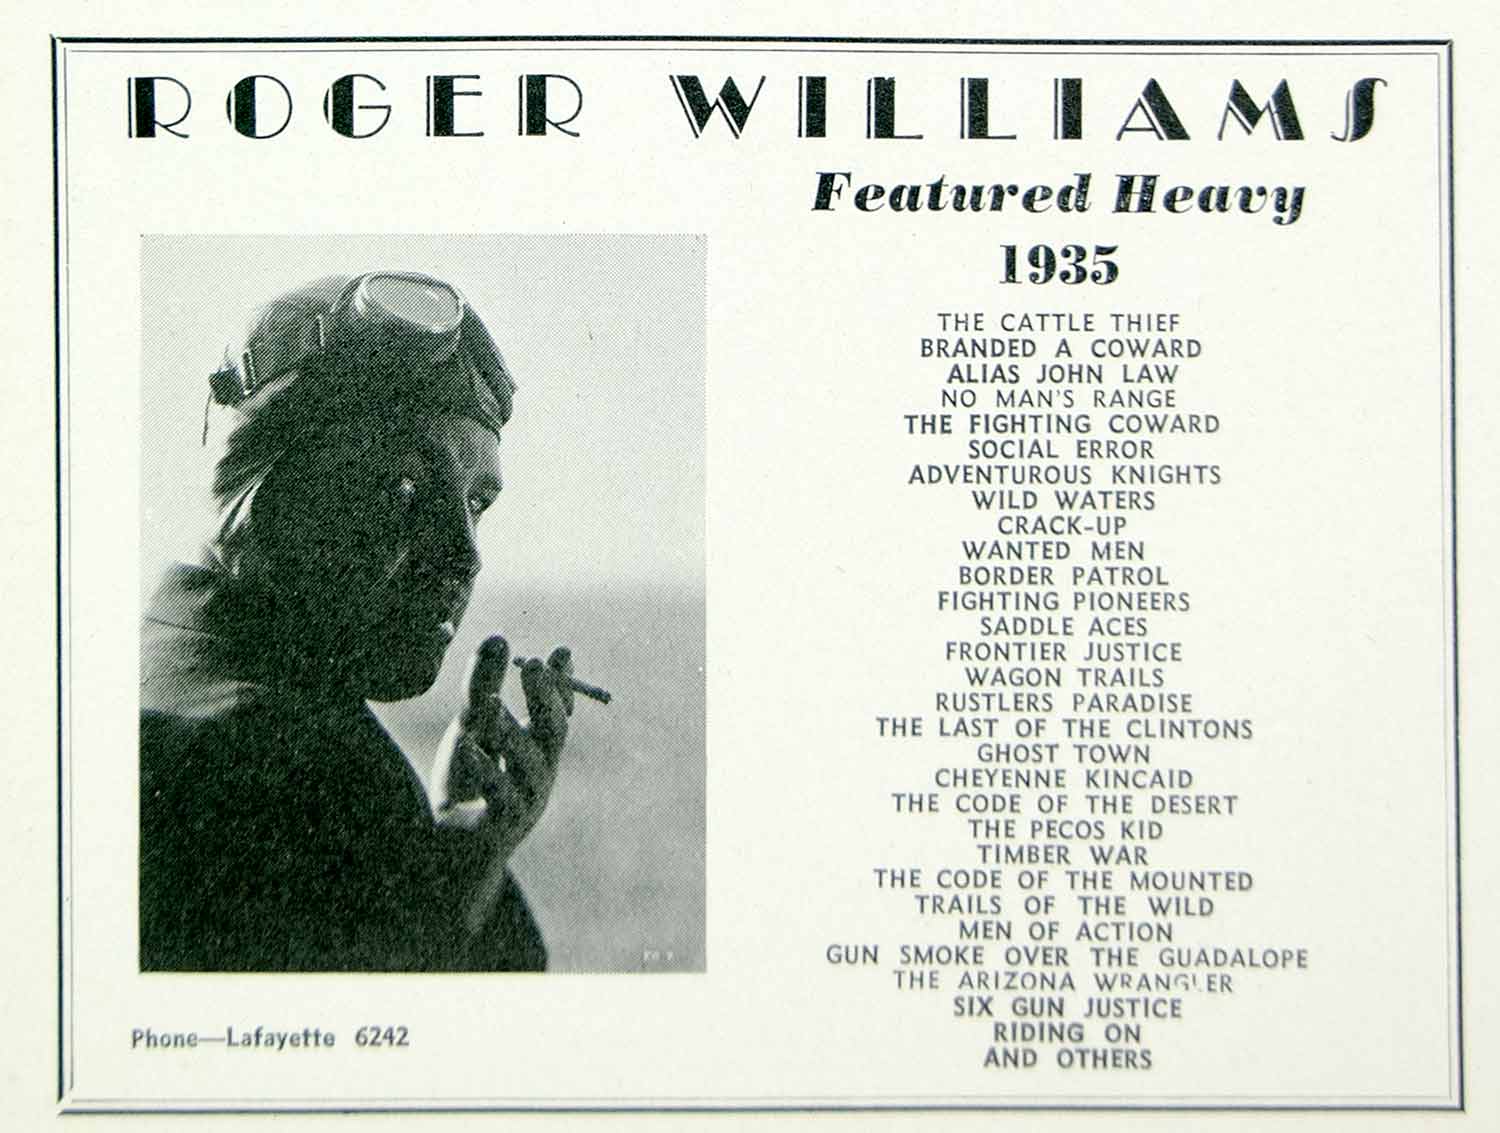 1936 Ad Roger Williams Movie Film Actor Heavy Motion Pictures Hollywood MOVIE3